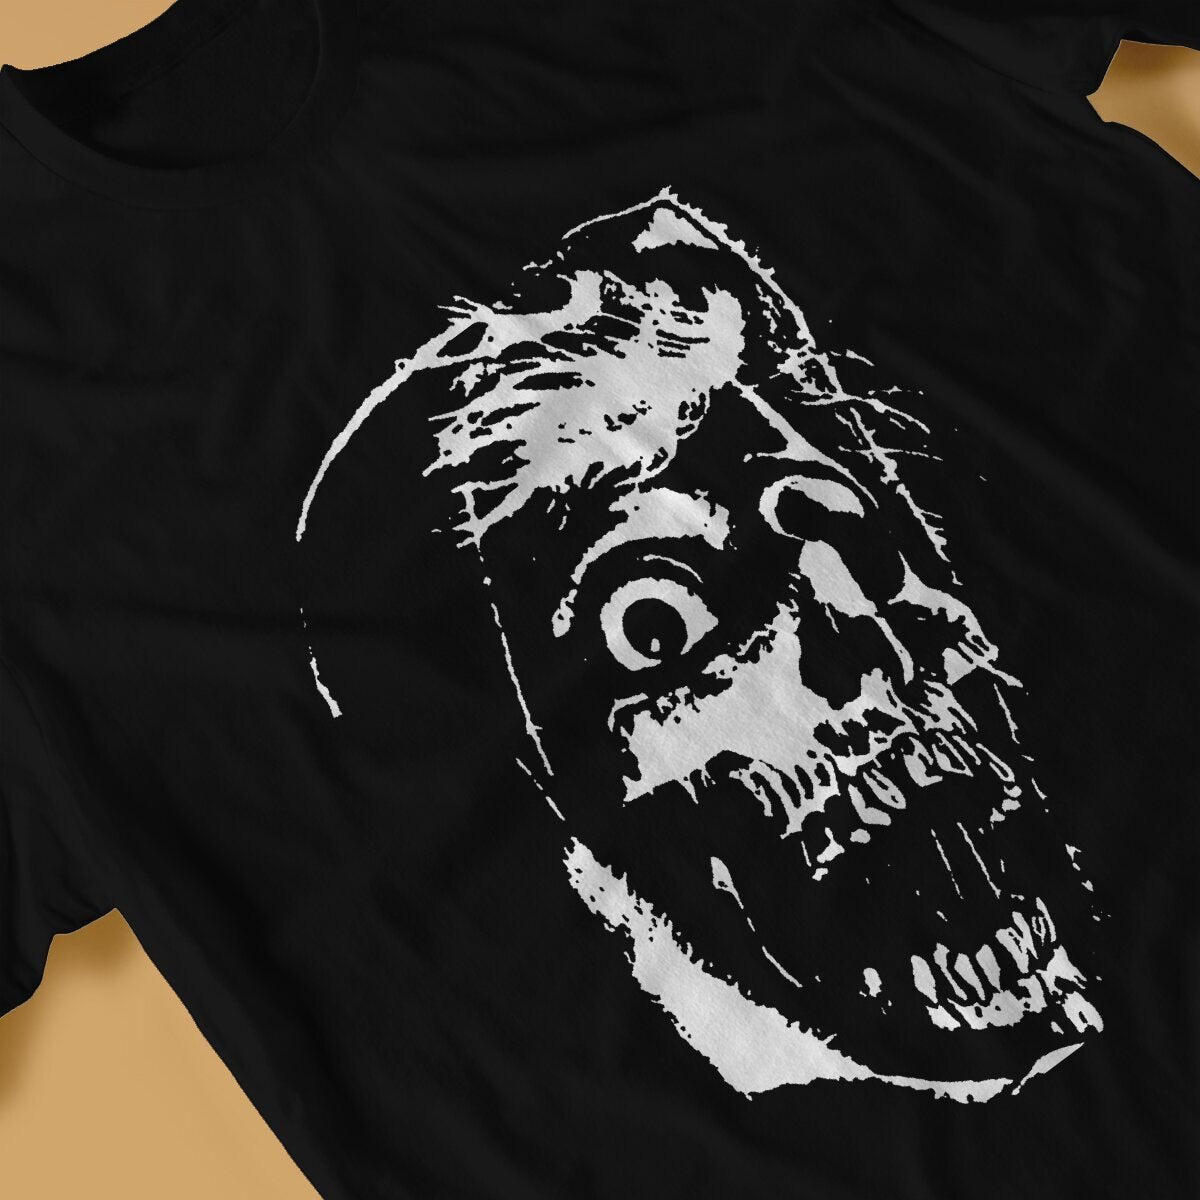 Creepshow - Classic 1980s Horror T-Shirt - Gifts For You Movie Lovers-